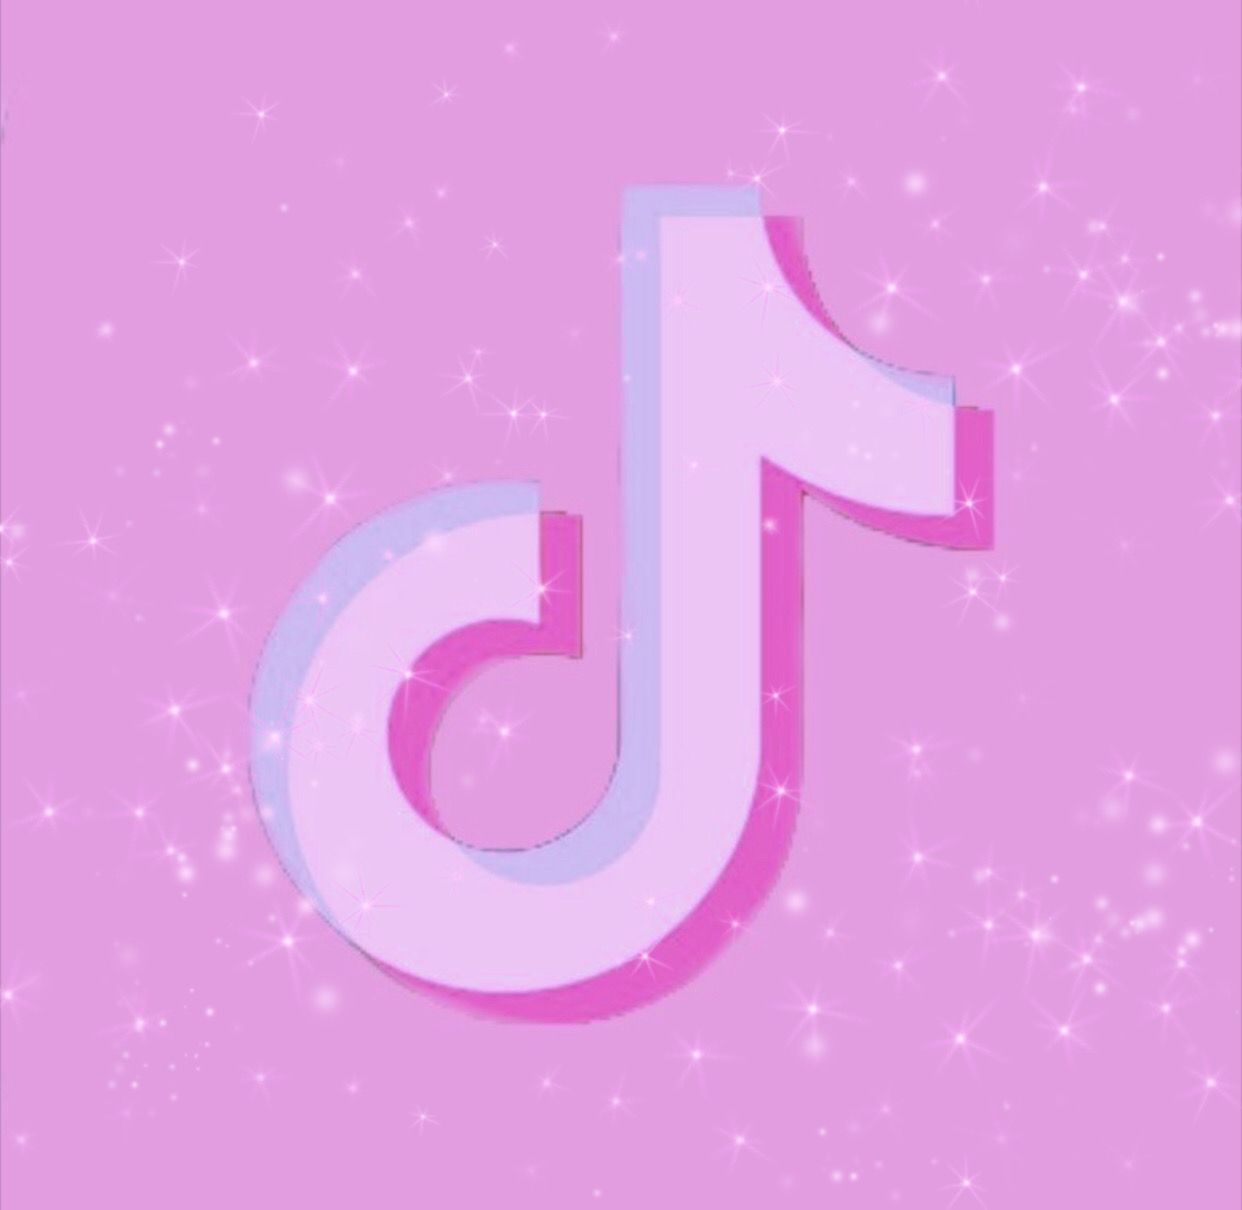 A pink and purple logo with the letter t - TikTok